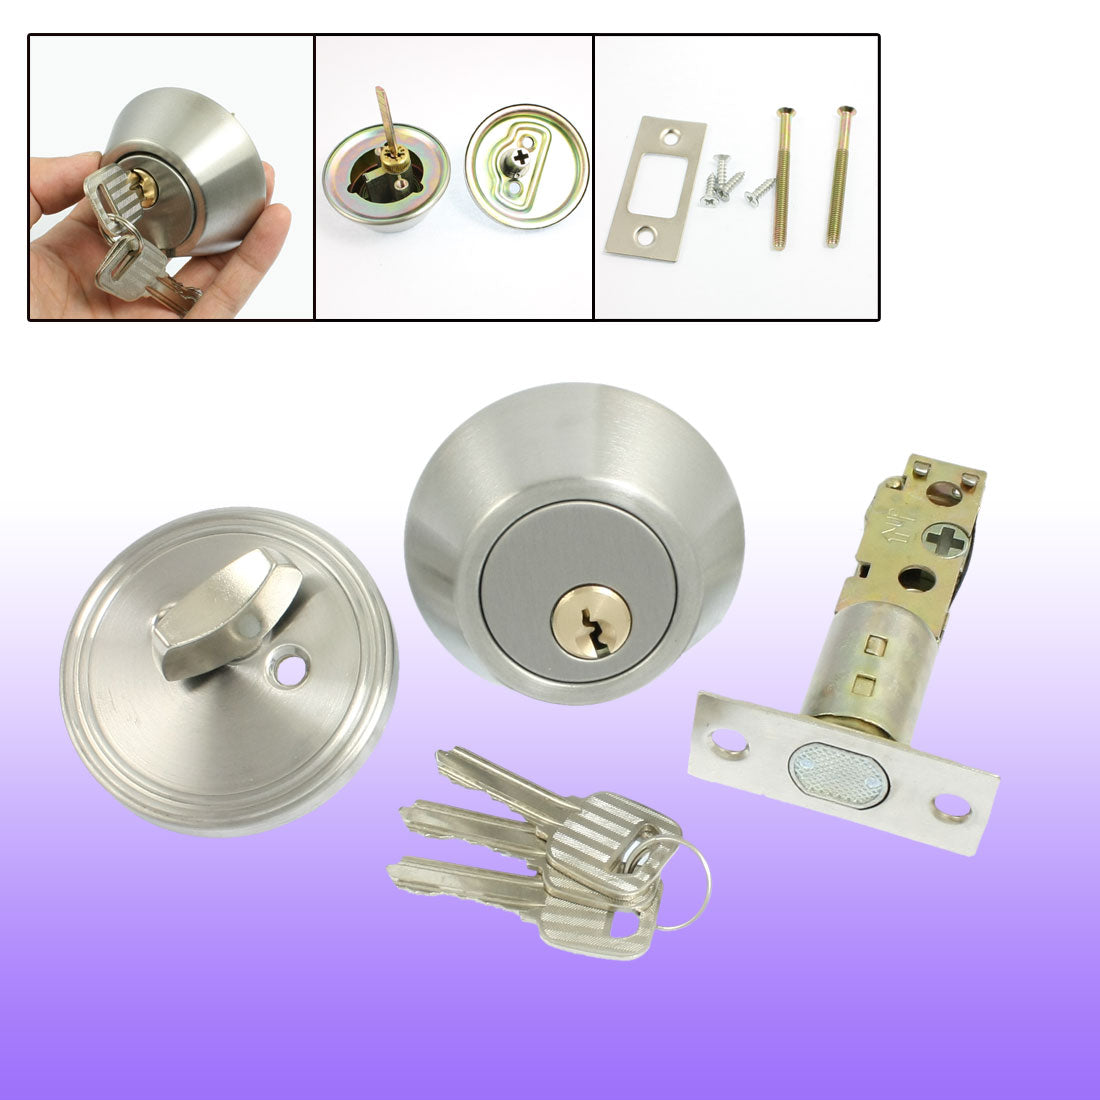 uxcell Uxcell Home Door Locking Security Single Cylinder Deadbolt Lock Silver Tone